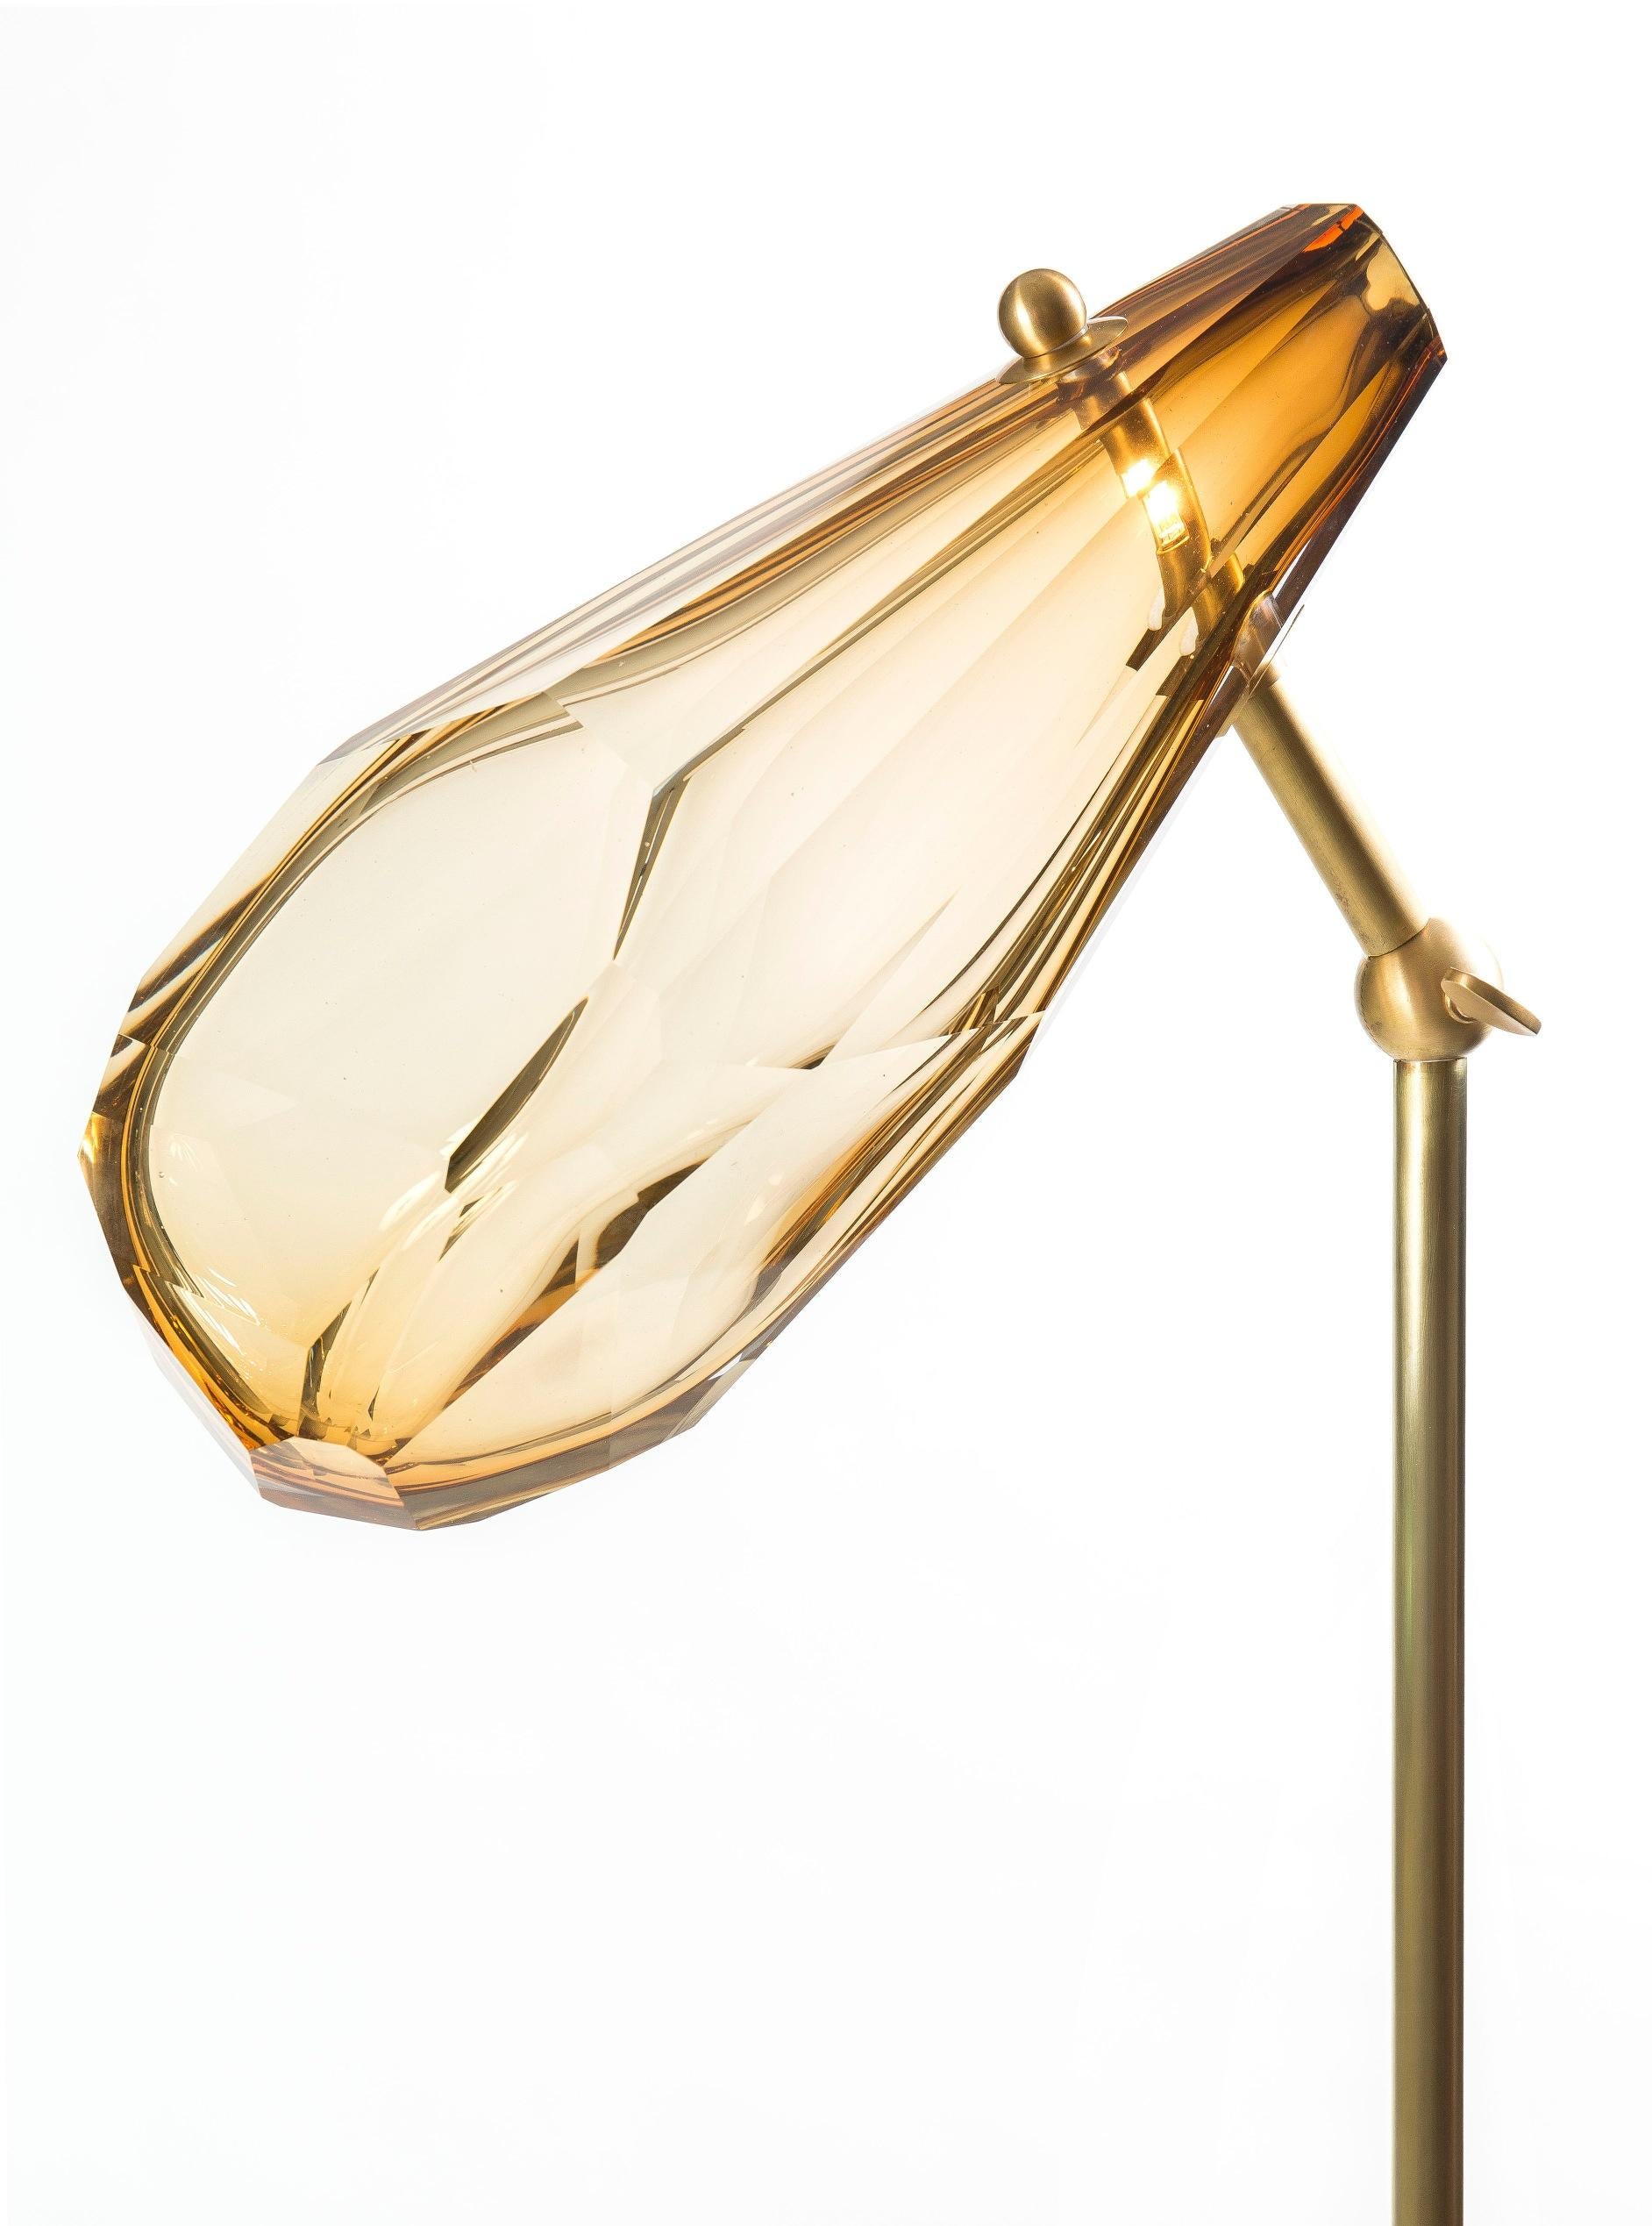 Floor lamp, articulated, made in brushed brass with an amber hand-blown glass. 
The glass is faceted by the hand like a precious stone. The result is each time different and unique. 
Limited edition of 8
Signed and Numbered

Measures: Diameter: